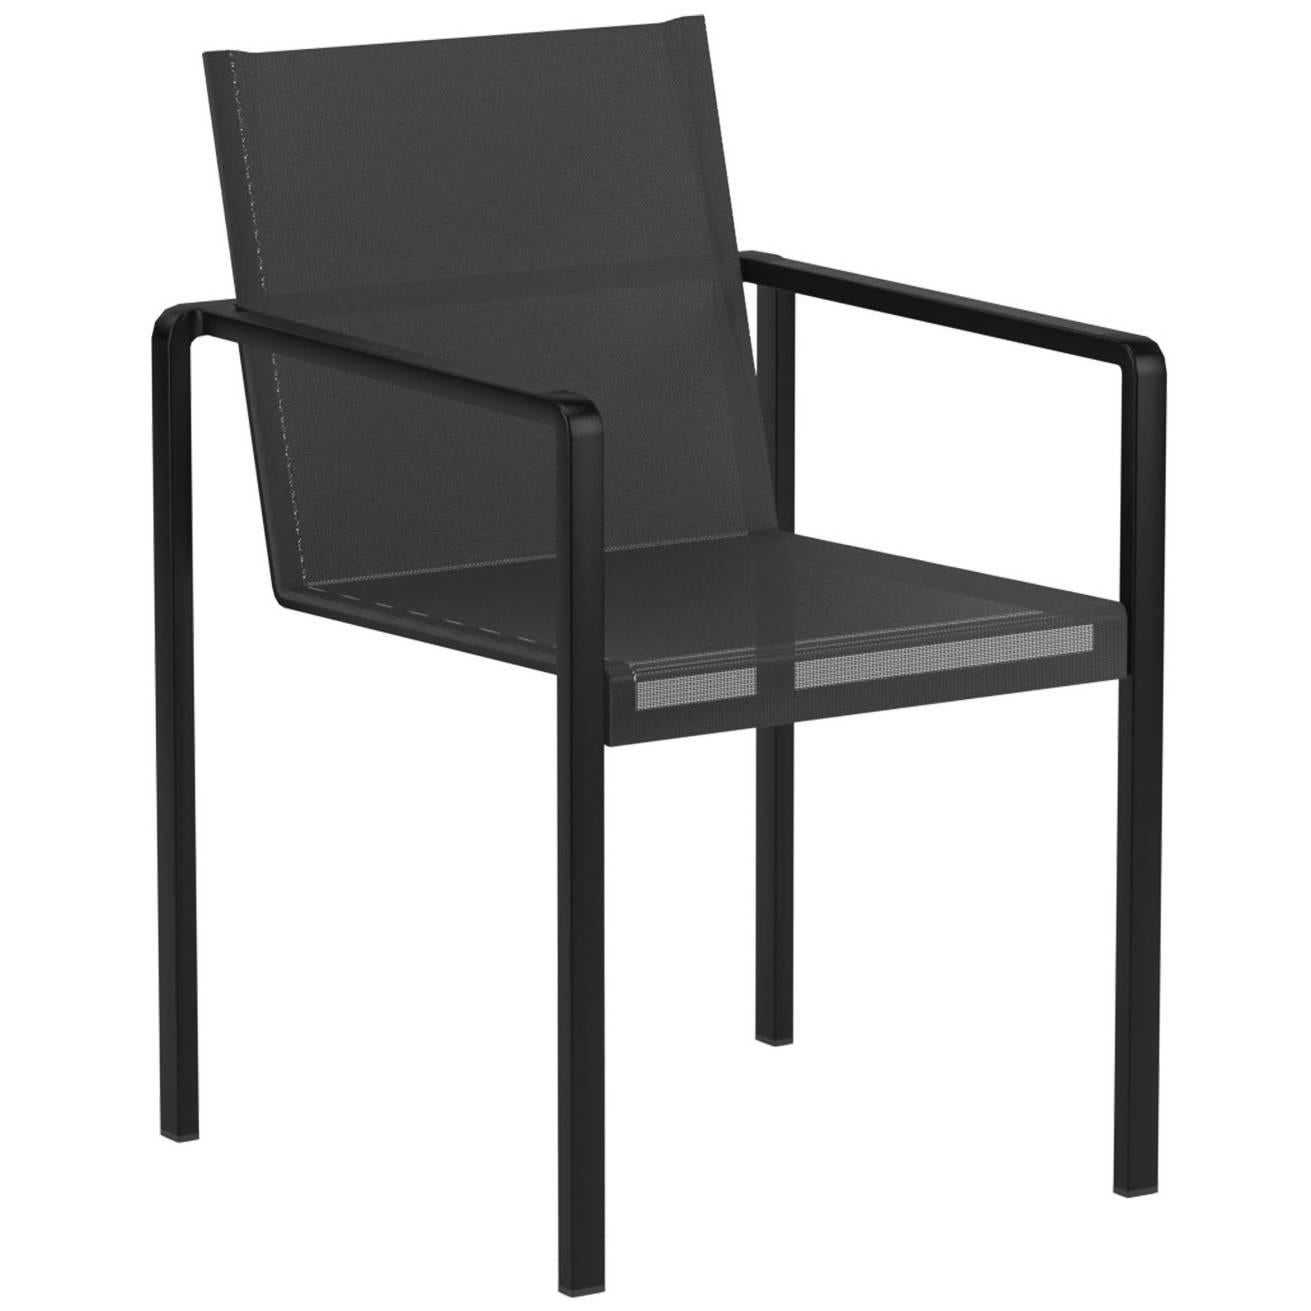 Black Alura 55 Outdoor Dining Armchair by Royal Botania, Belgium For Sale